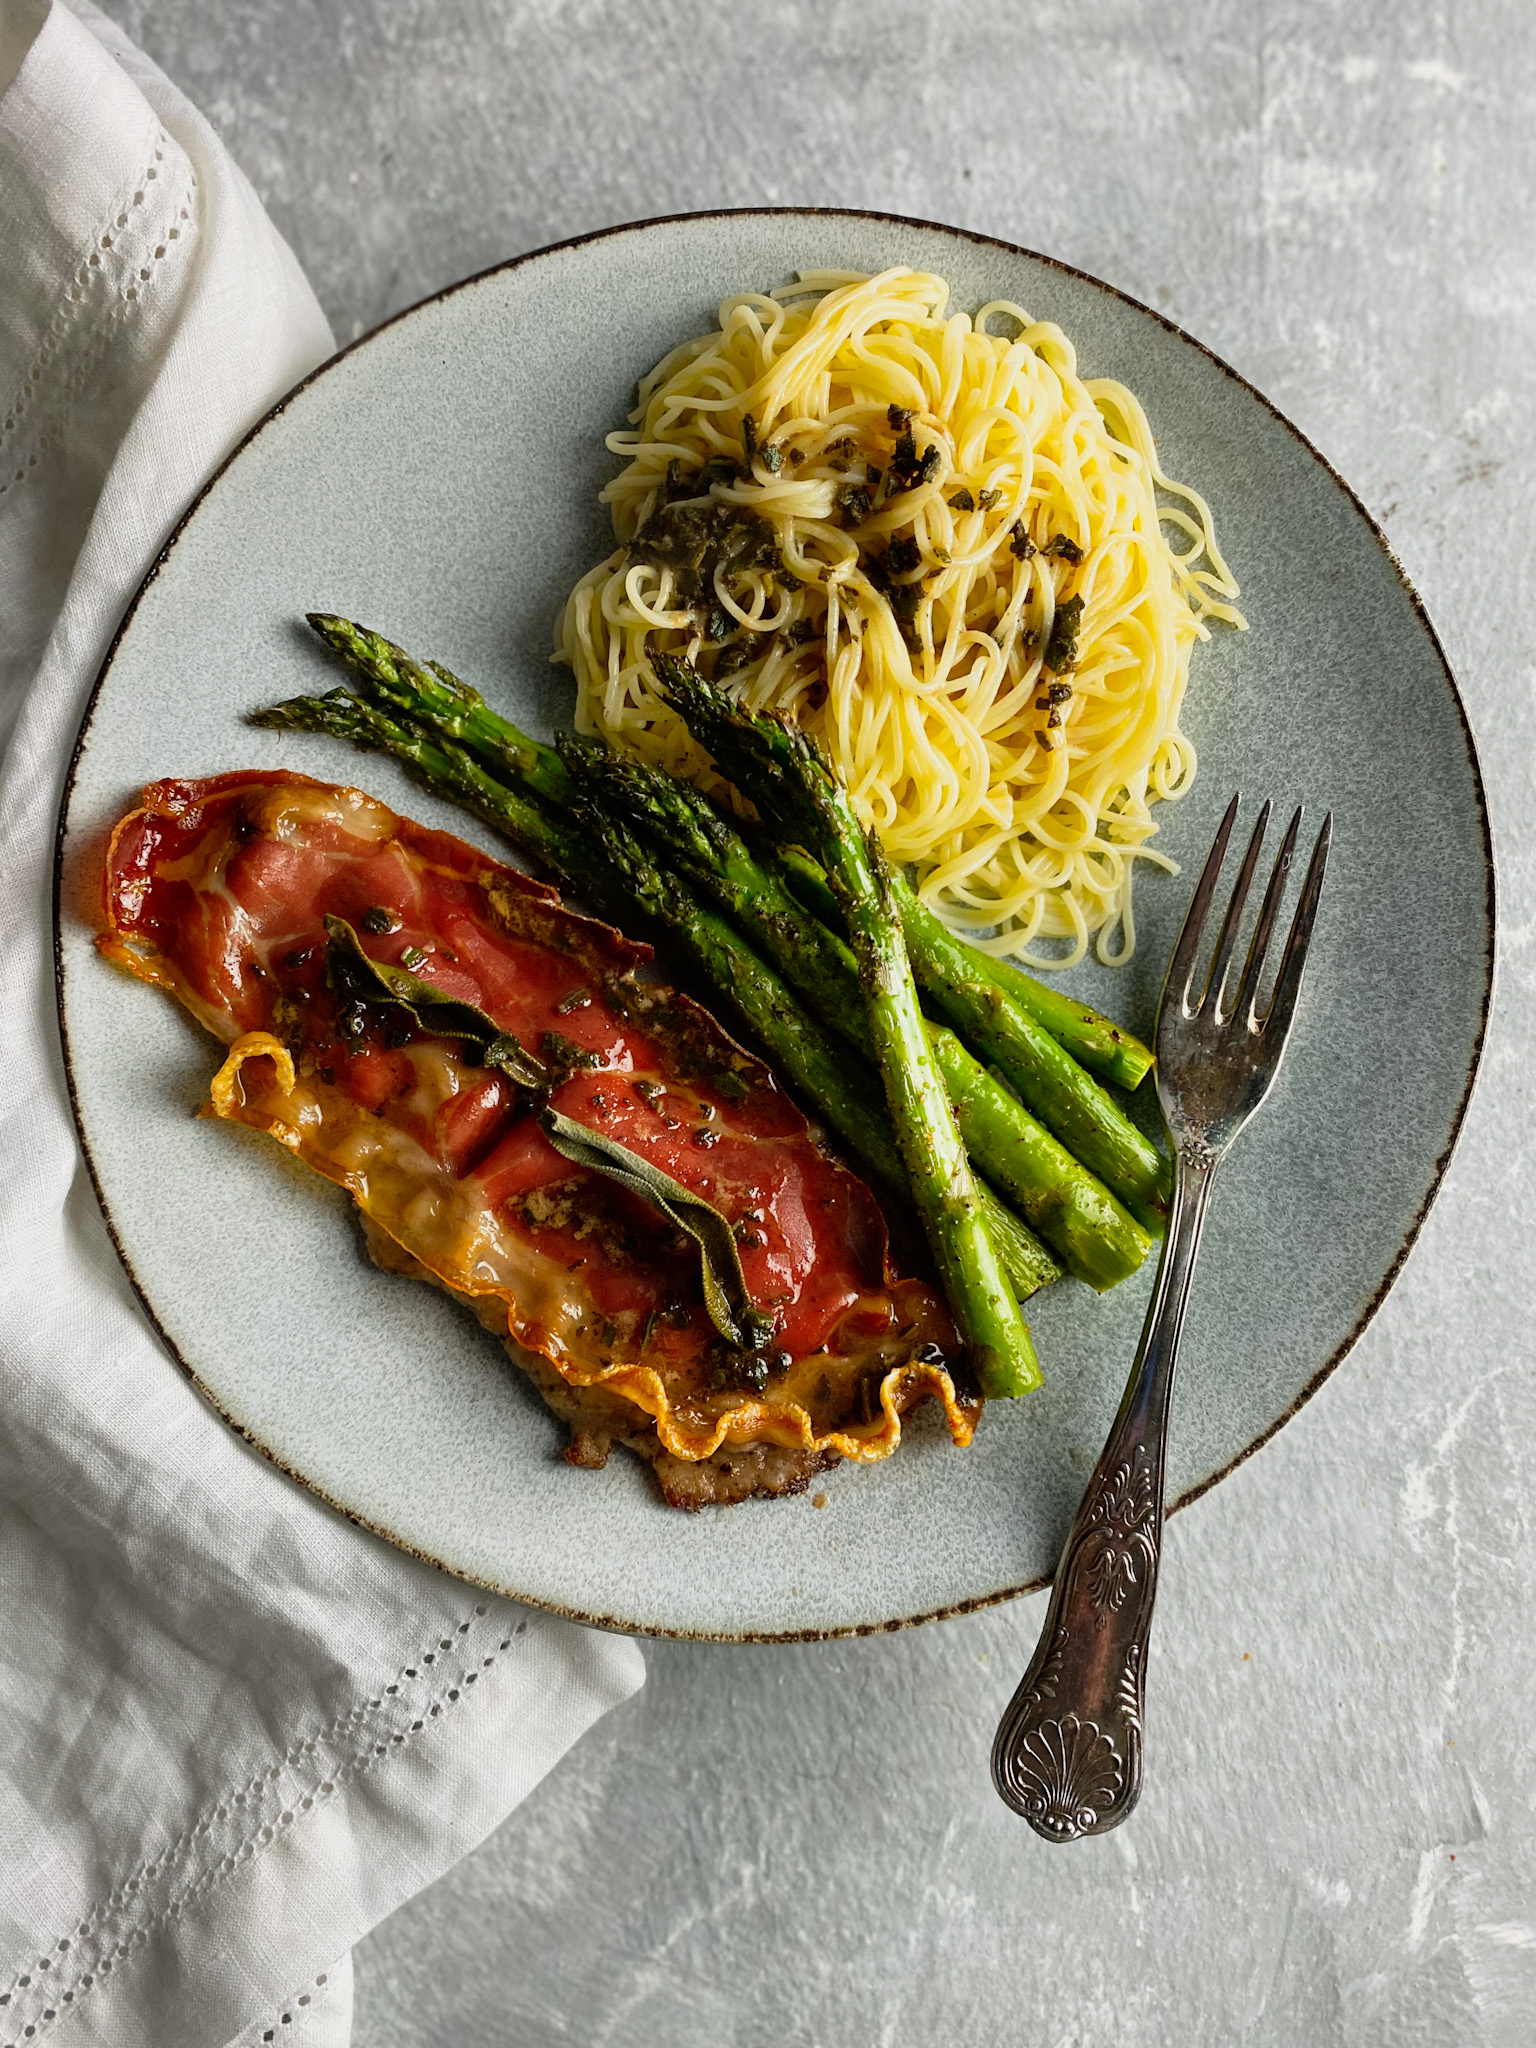 Date Night Dinner ofVeal Saltimbocca and